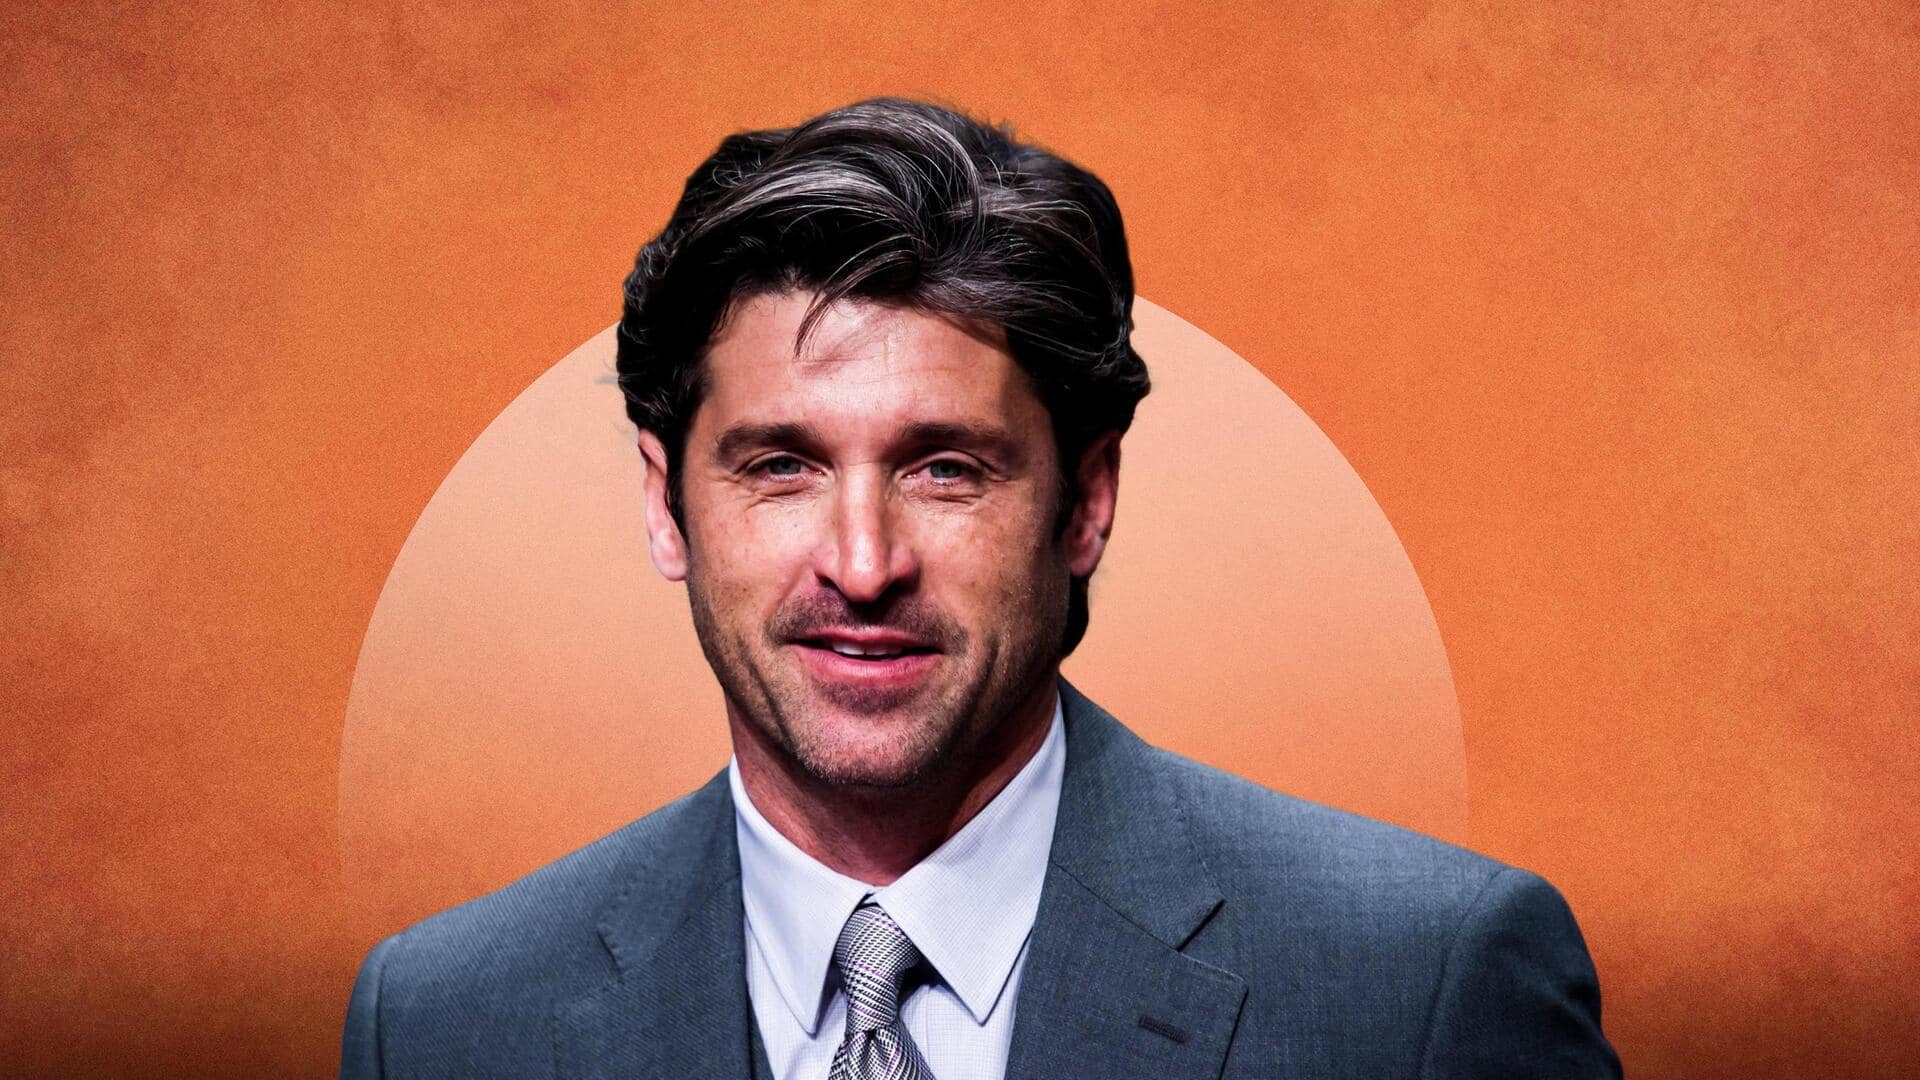 Patrick Dempsey is Sexiest Man Alive 2023. Do you agree